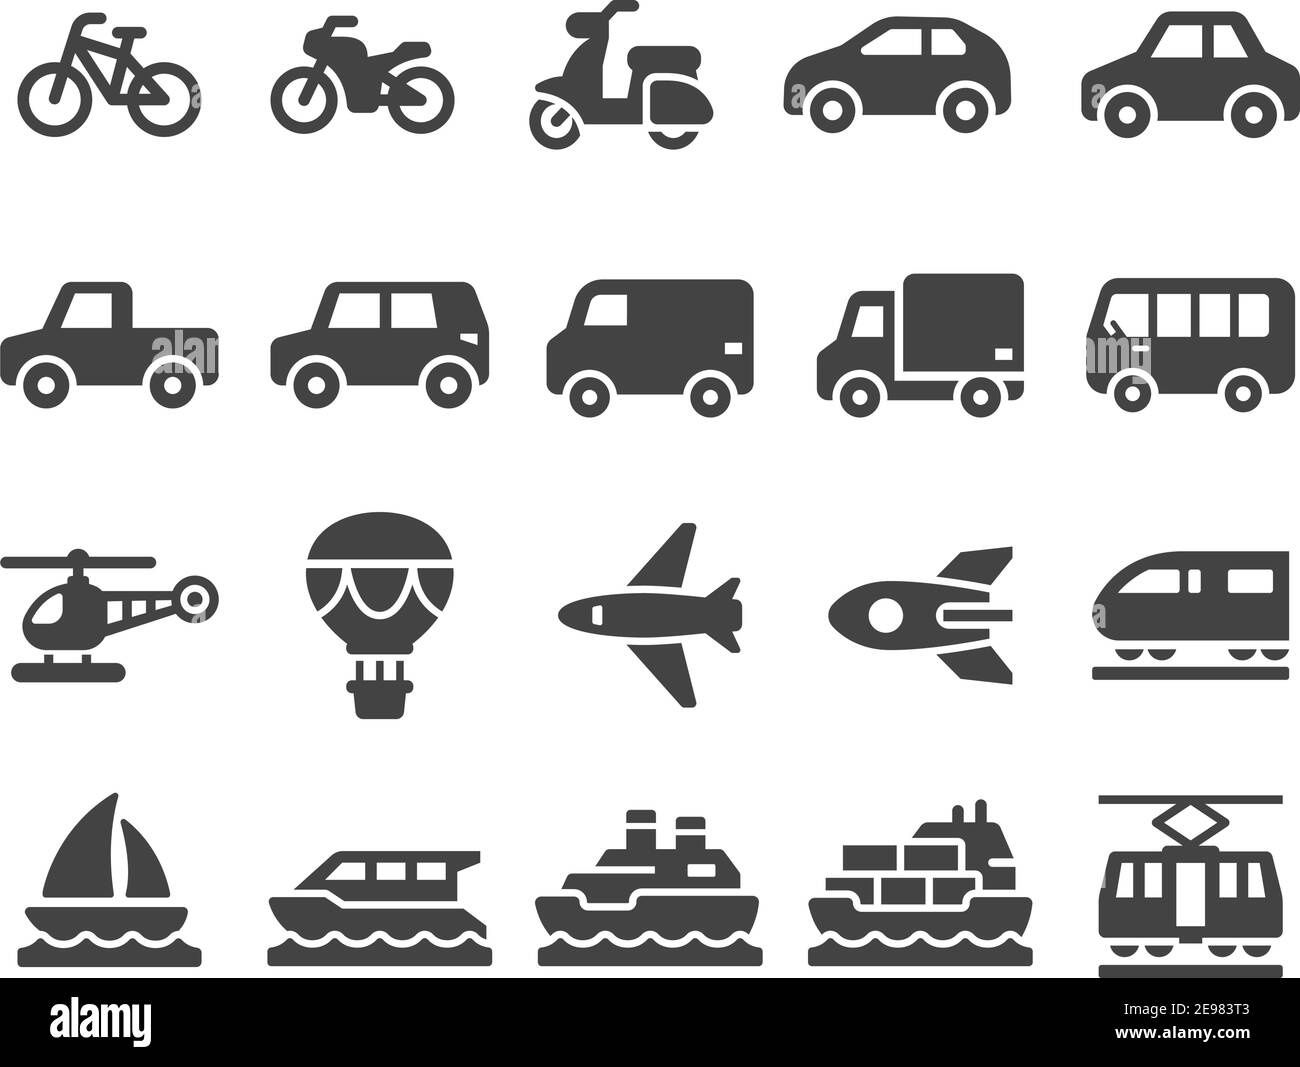 vehicle and transport icon set,solid and glyph style,vector and illustration Stock Vector